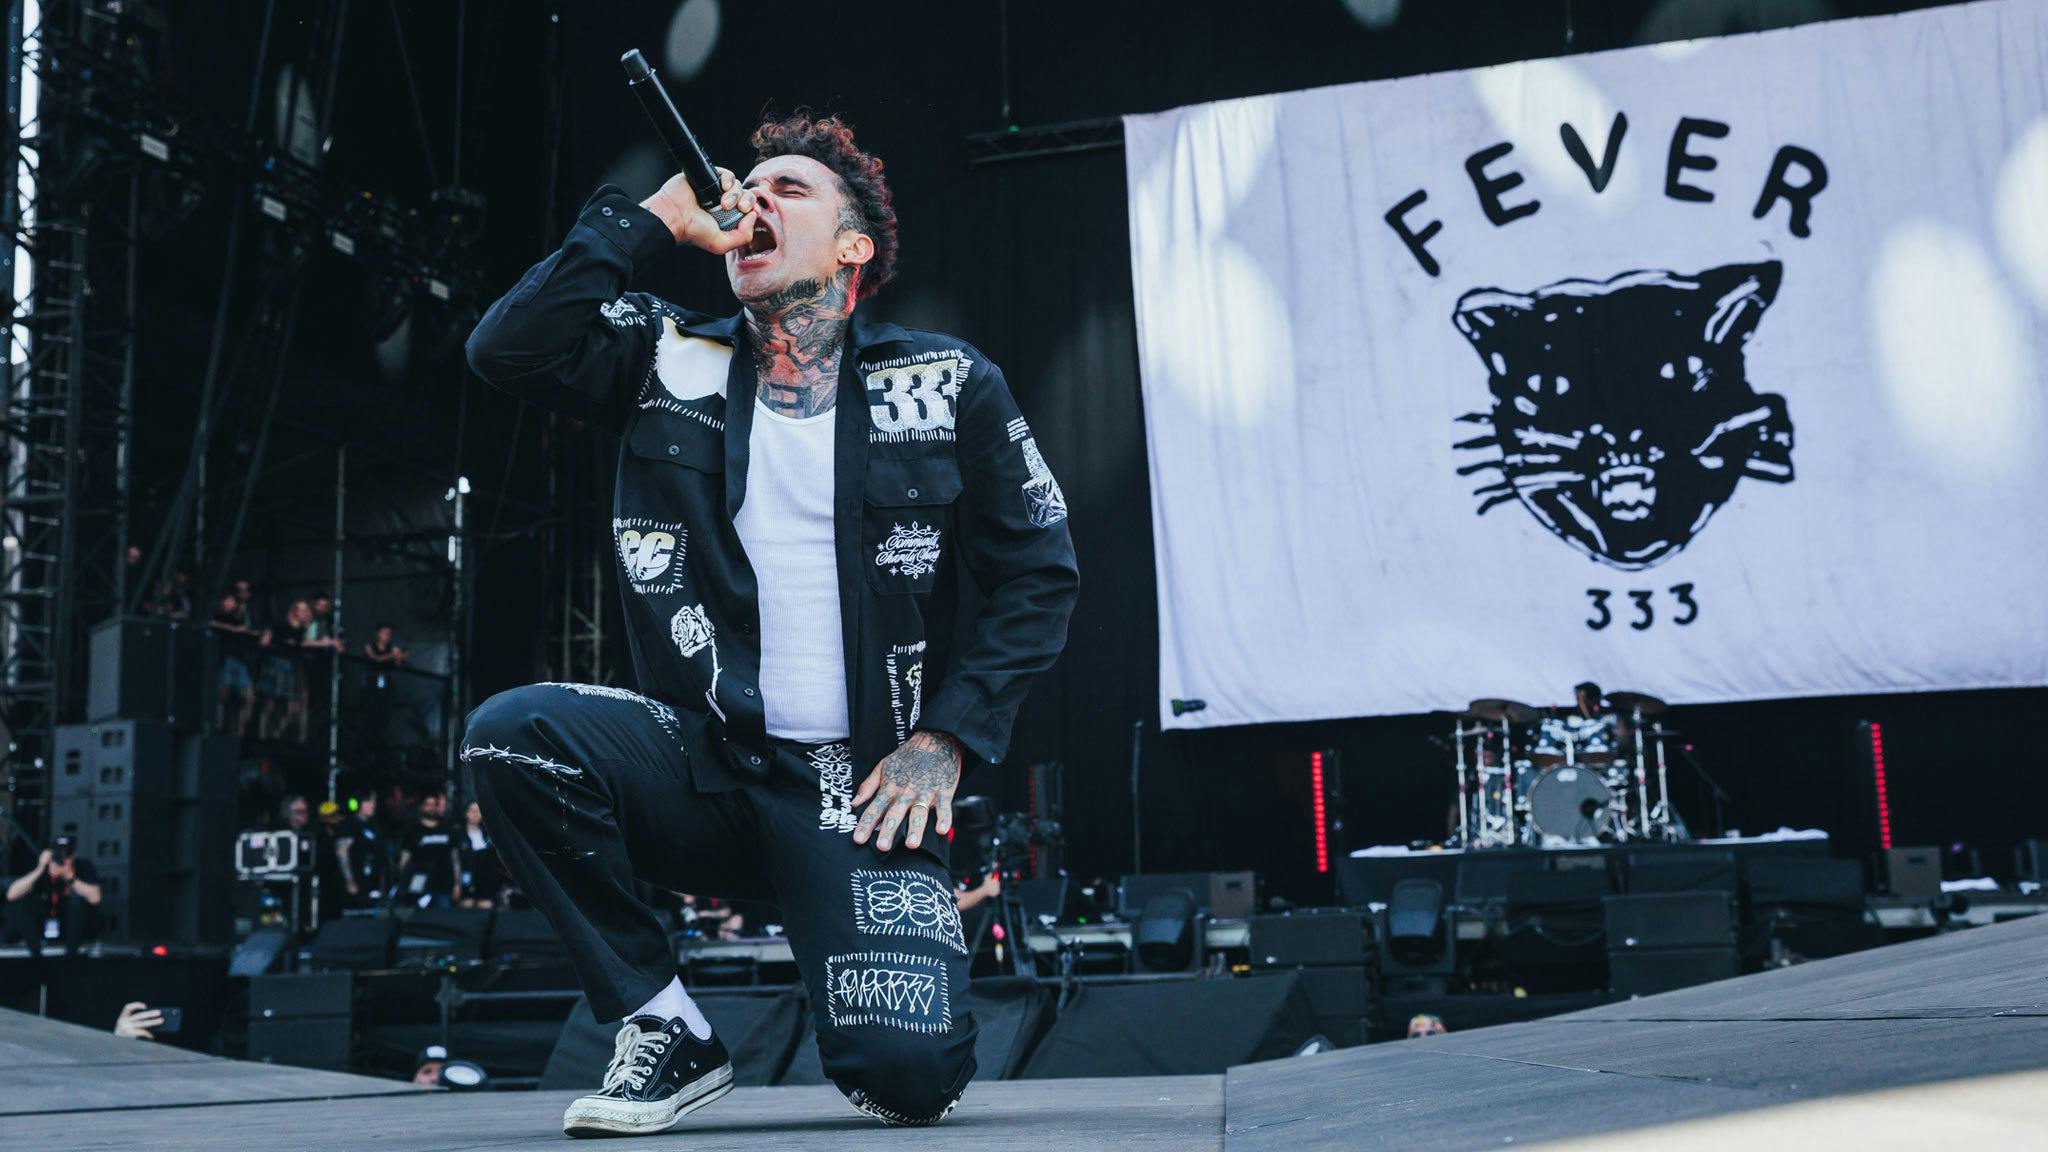 FEVER 333 have unleashed a brand-new single, READY ROCK